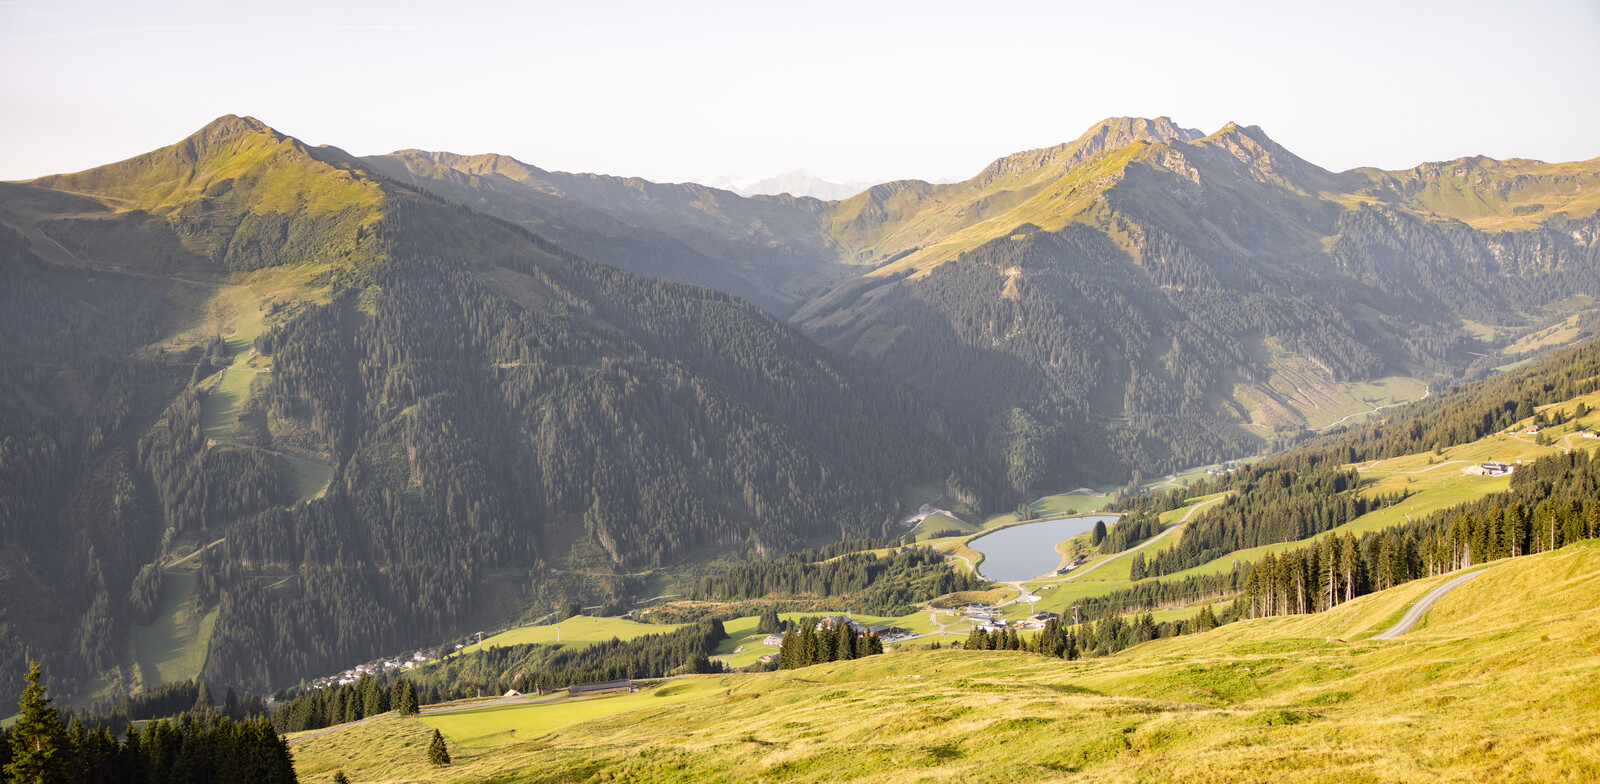 The reservoirs are also a scenic highlight at sunrise | © saalbach.com, Andreas Putz